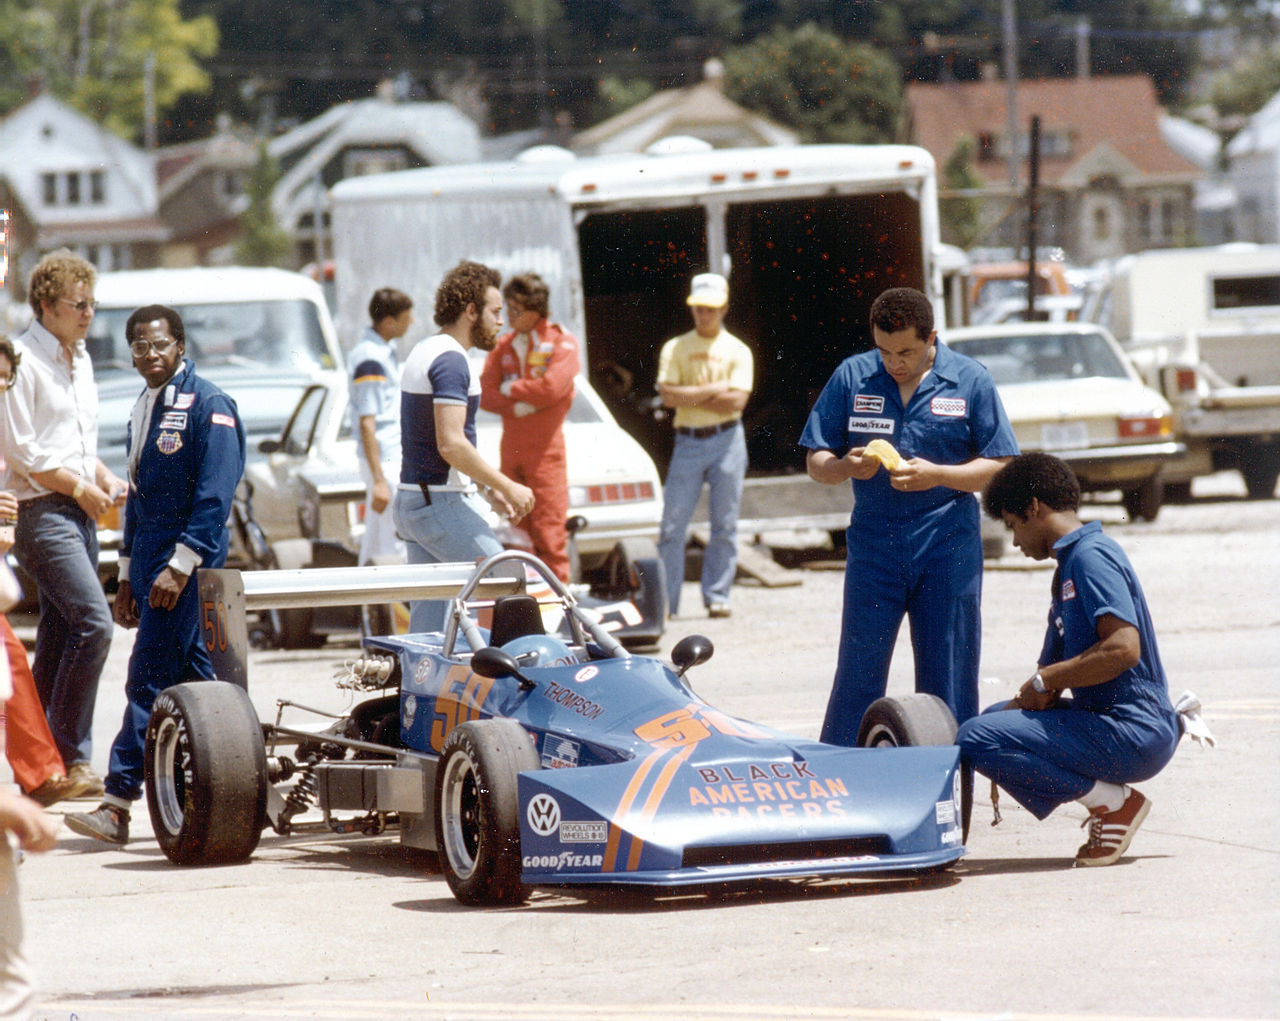 Tommy Thompson walks behind his car at Milwaukee. A week later he would be killed at Trenton. Oh what might have been.